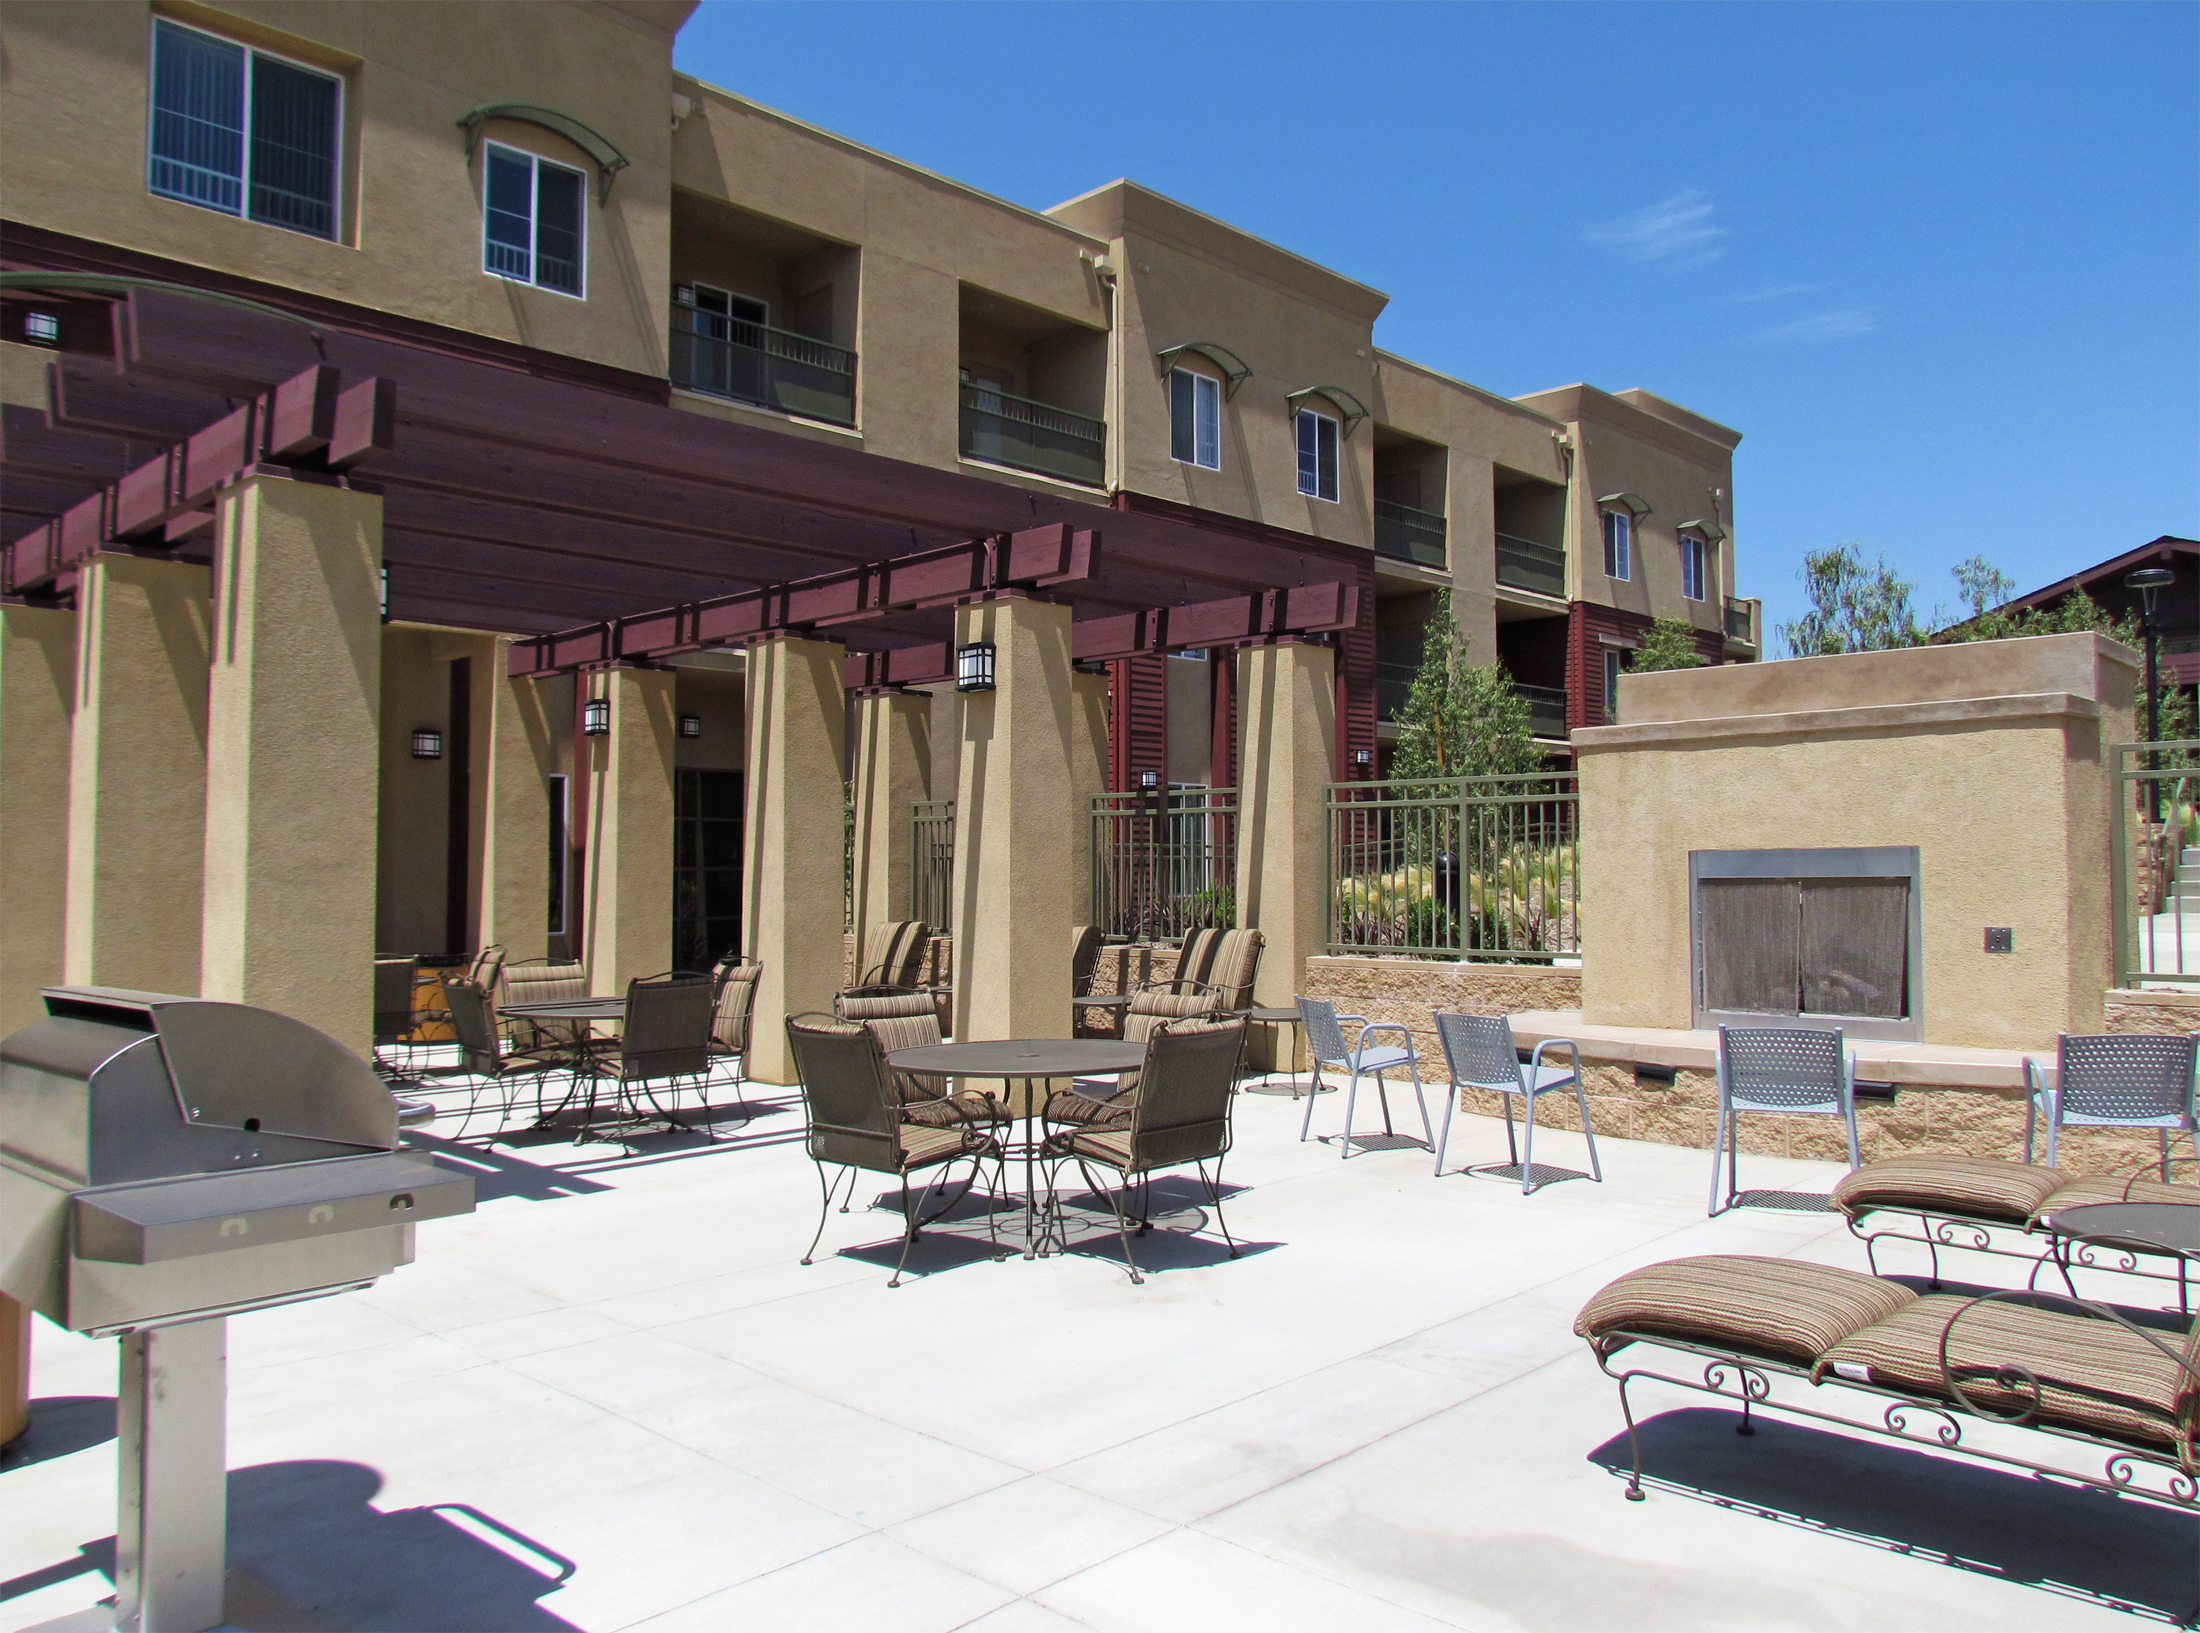 Exterior view of the patio area at Osborne Street Apartments. Tables, chairs, lounge chairs, fireplace, and a barbeque